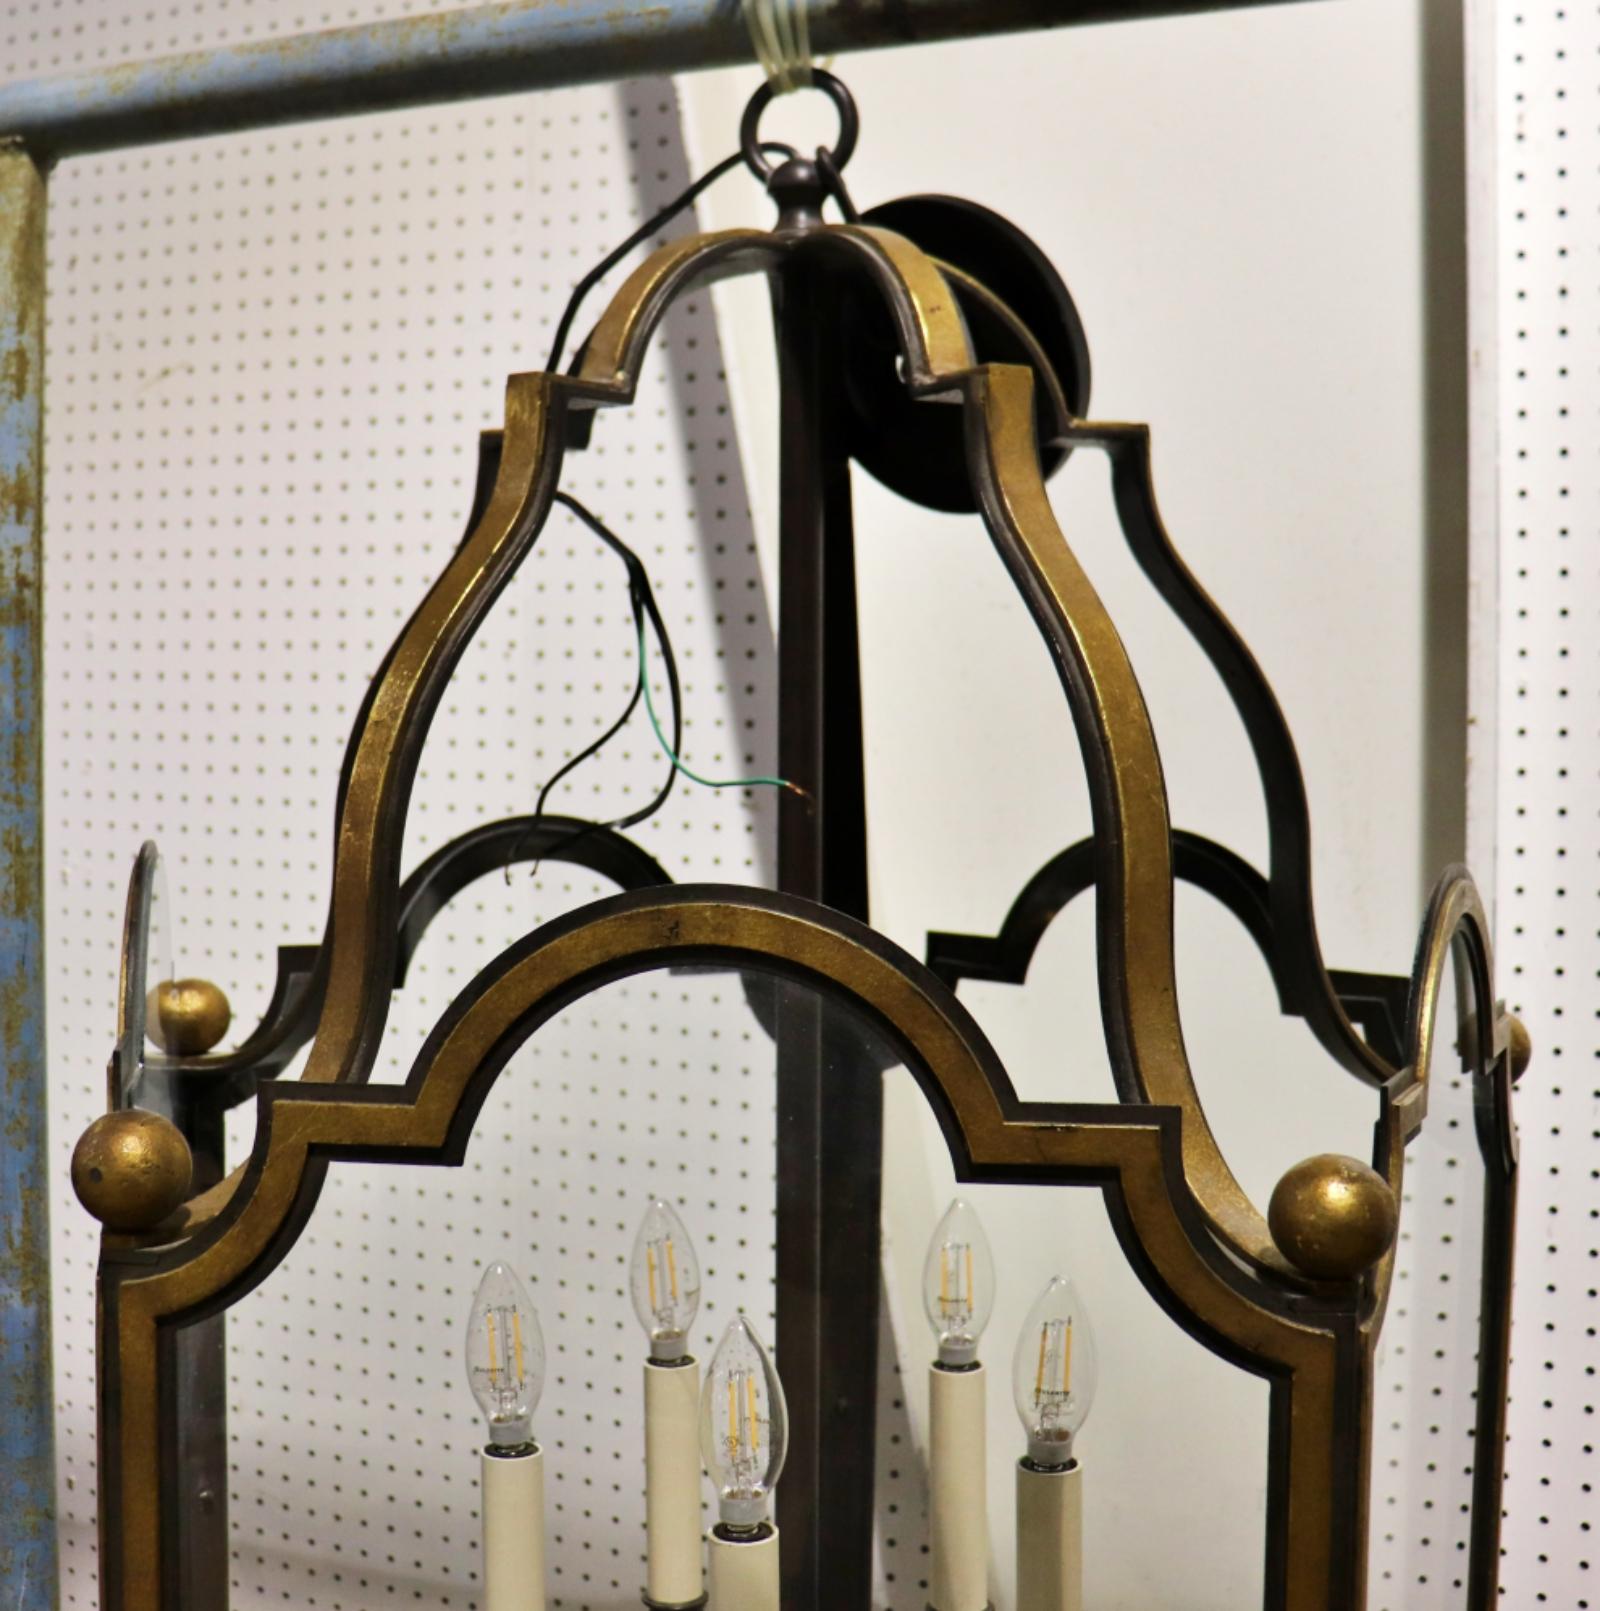 French Provincial High Quality Wrought Iron 5 Panel 5 Light Glazed Chandelier Lantern For Sale